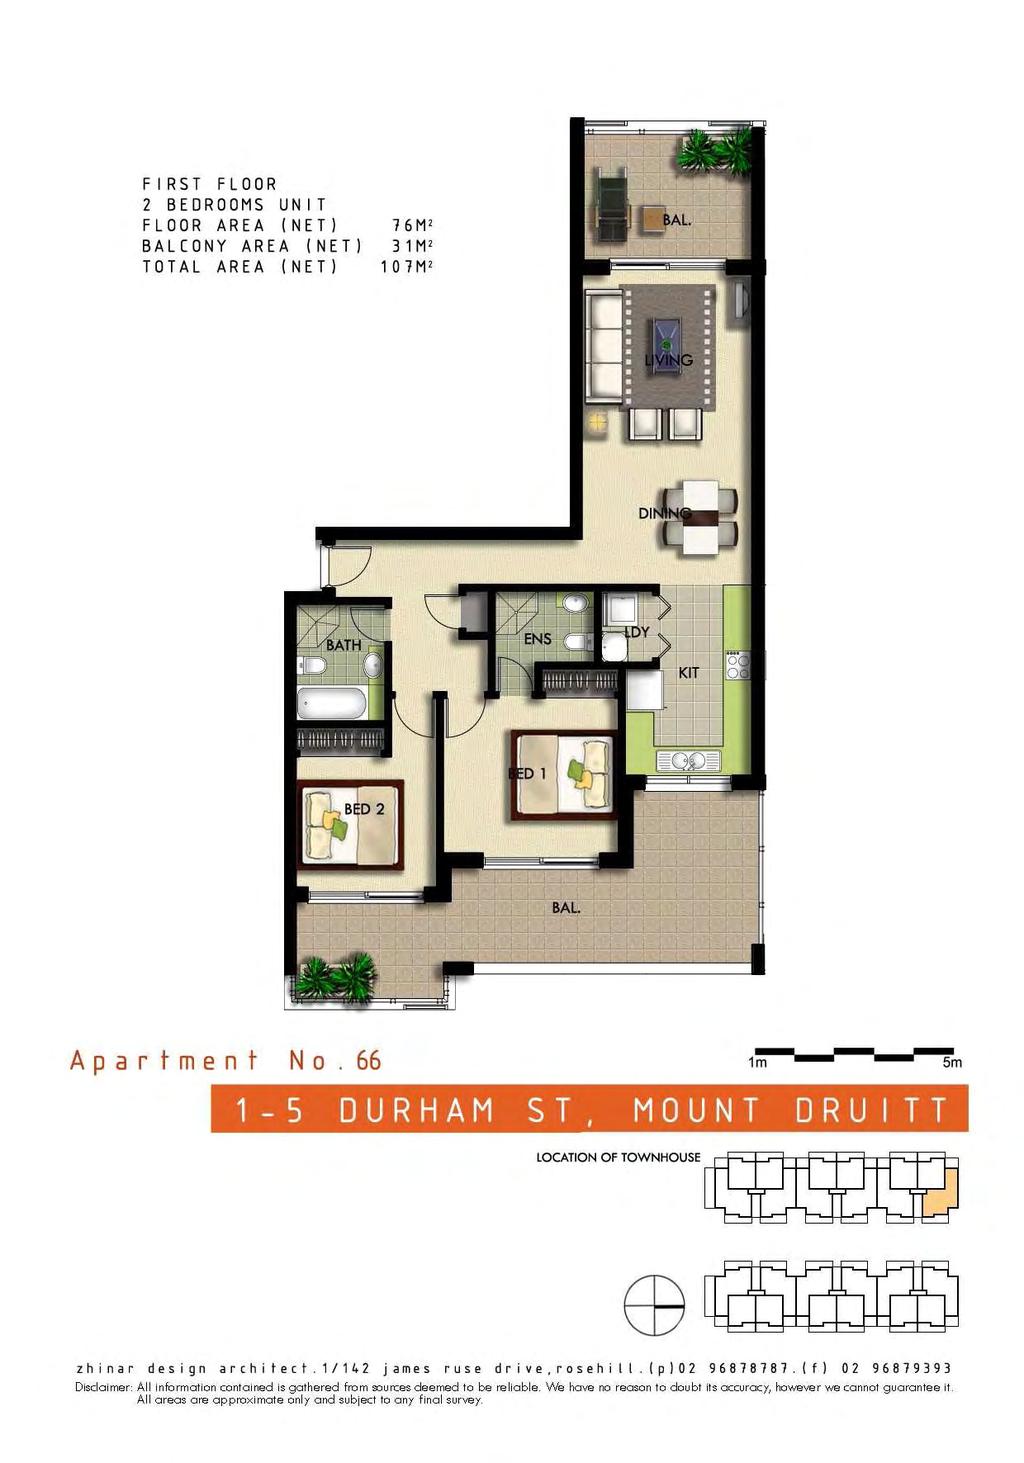 Floor plans The following units relate to